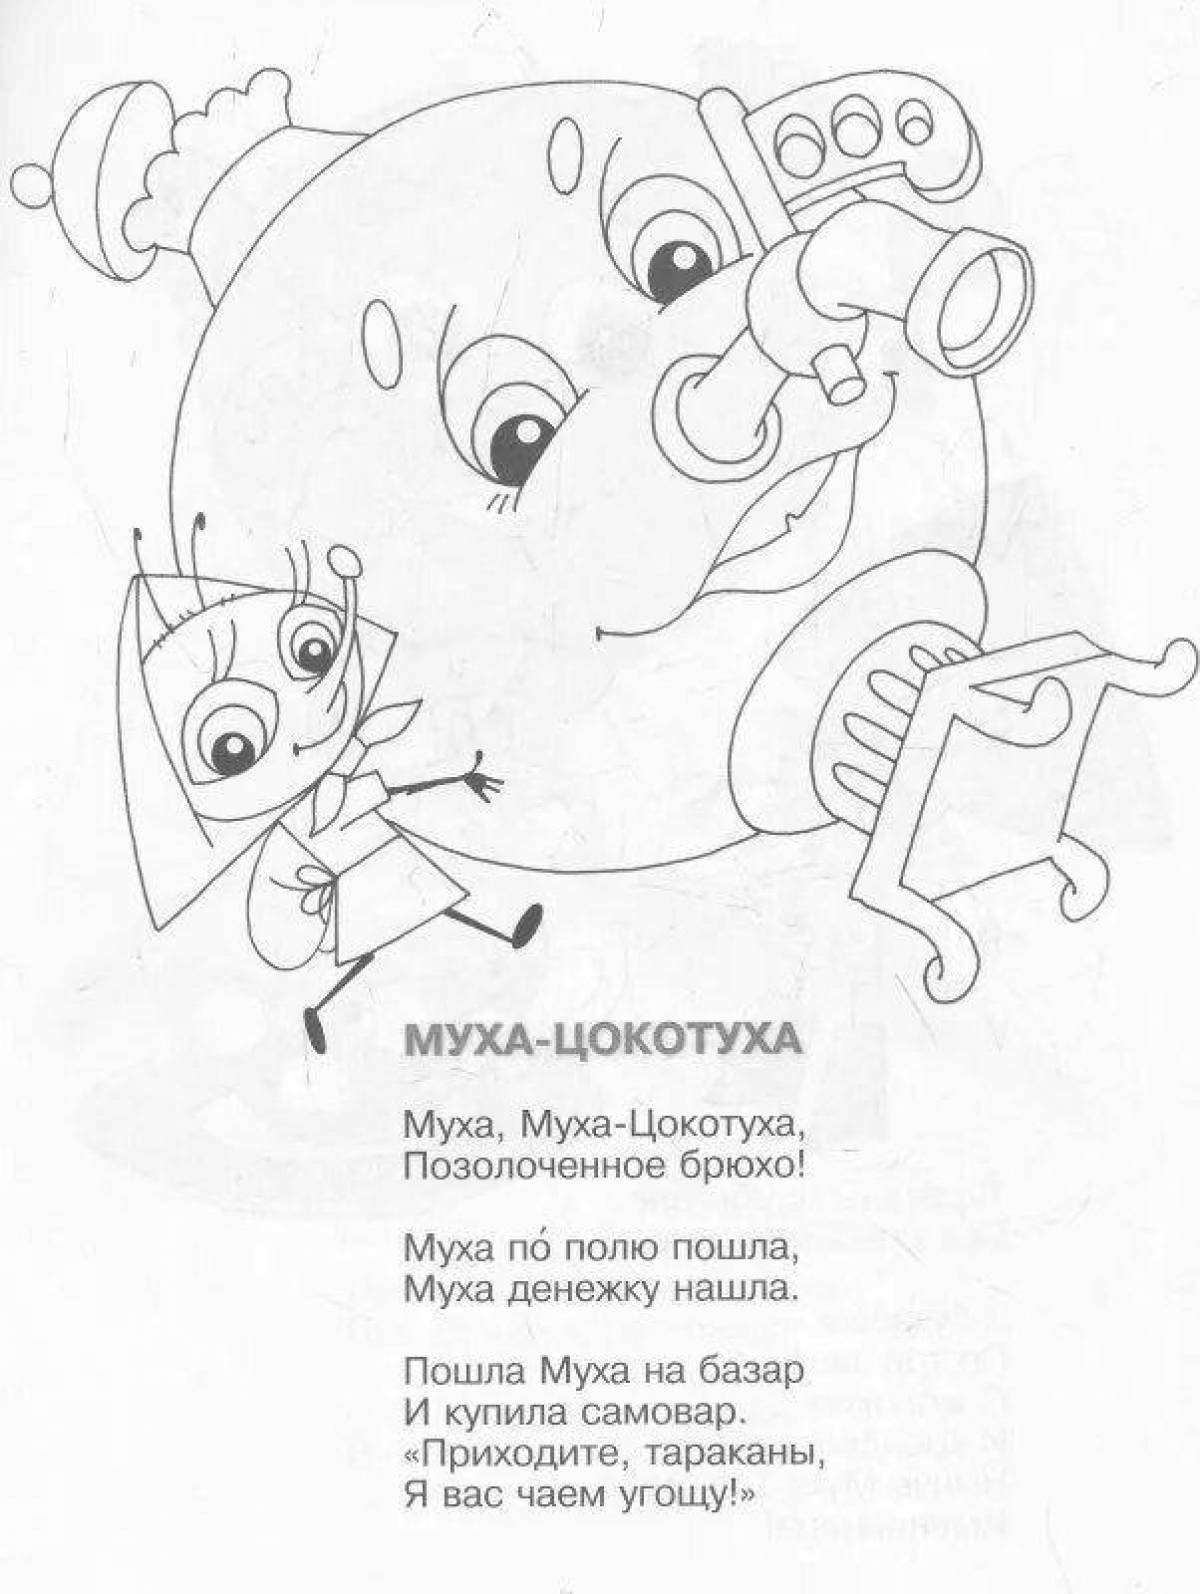 Colour-Crazy Chukovsky Coloring Pages